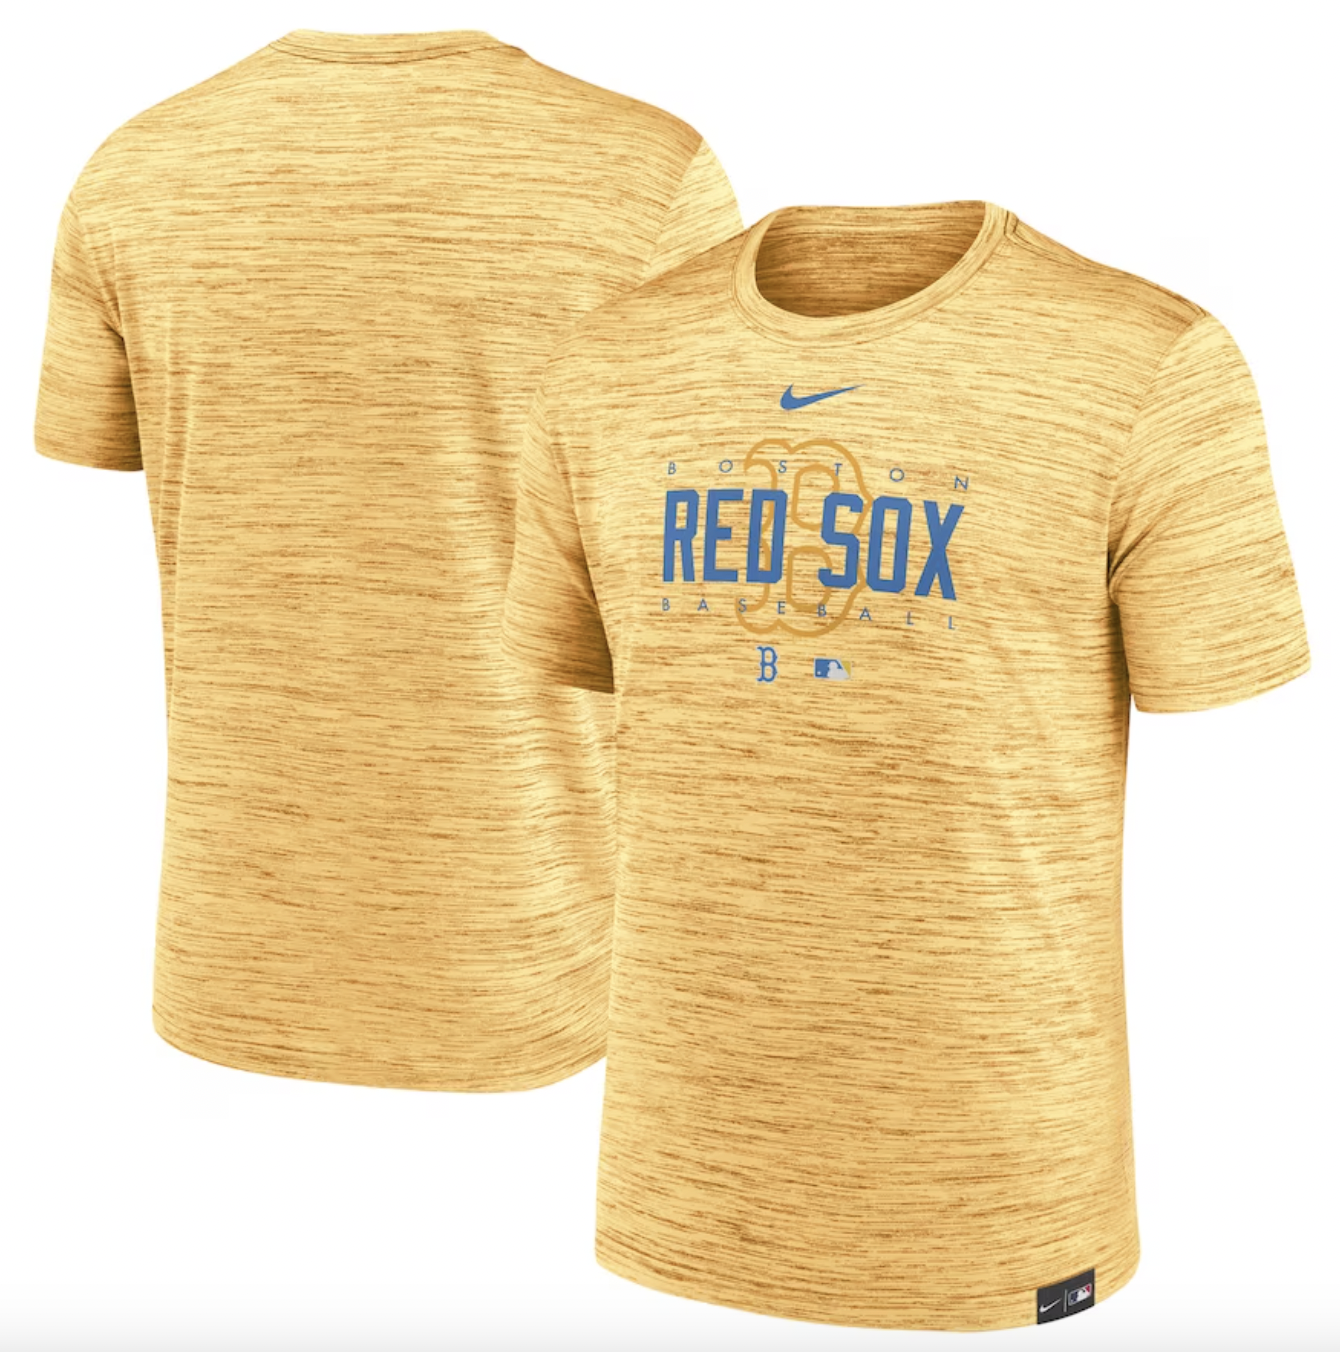 Where to buy Red Sox Boston Marathon yellow and blue Patriots Day